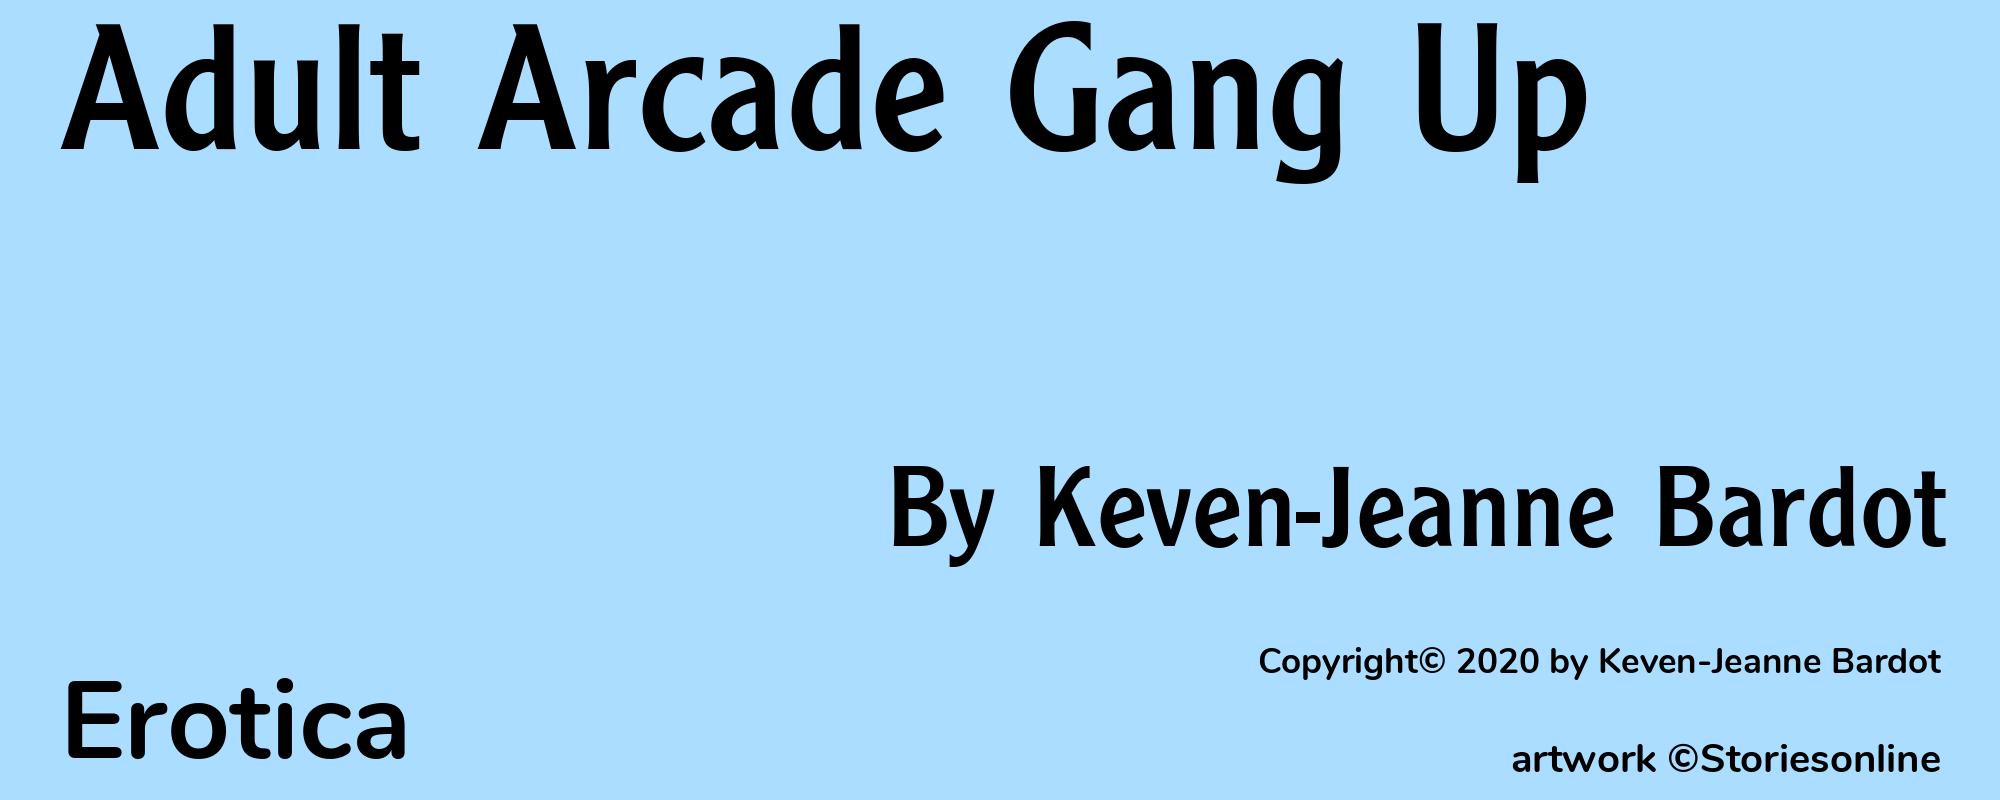 Adult Arcade Gang Up - Cover